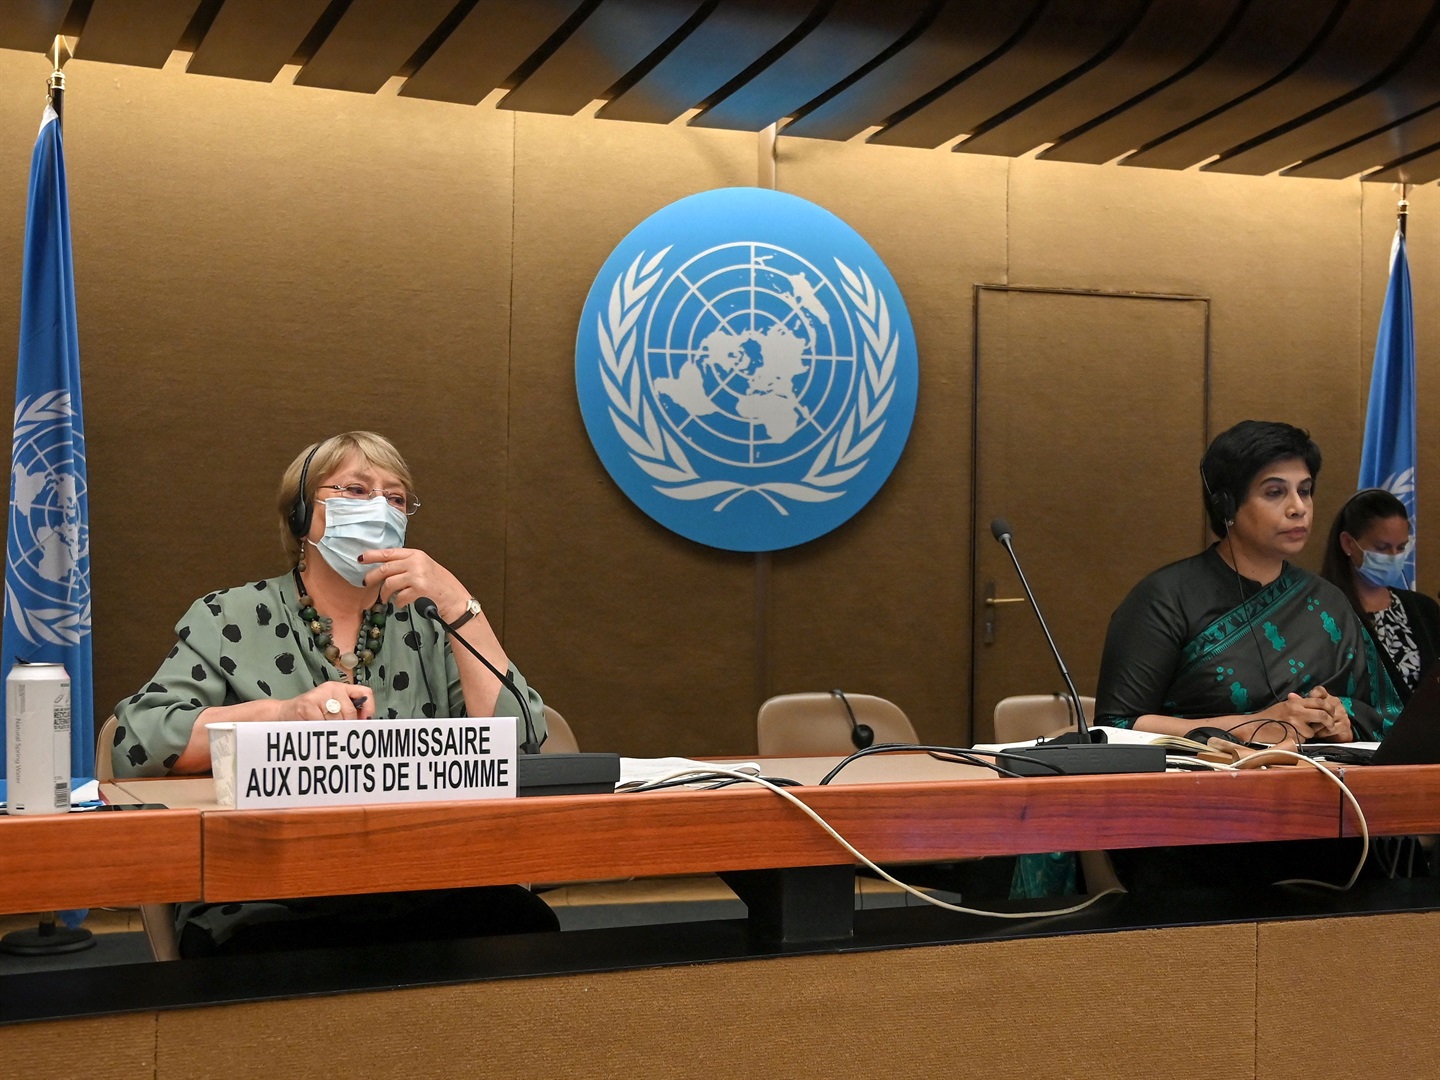 United Nations human rights chief Michelle Bachelet (L) sits next to Human Rights Council president Ambassador Nazhat Shameem Khan (R) after delivering a speech during a session of the Human Rights Council in Geneva.
